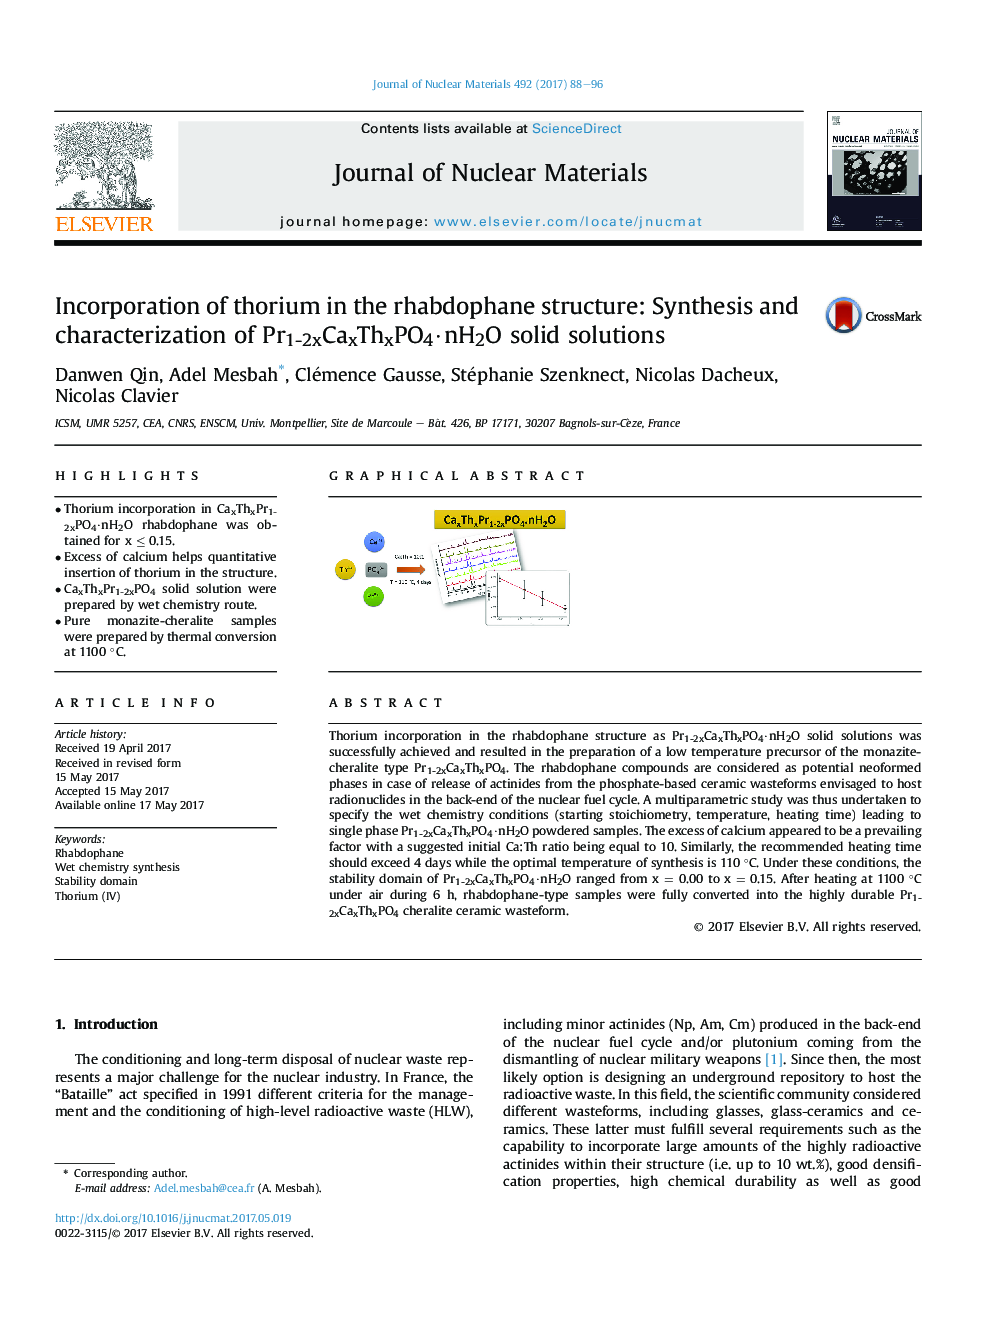 Incorporation of thorium in the rhabdophane structure: Synthesis and characterization of Pr1-2xCaxThxPO4Â·nH2O solid solutions